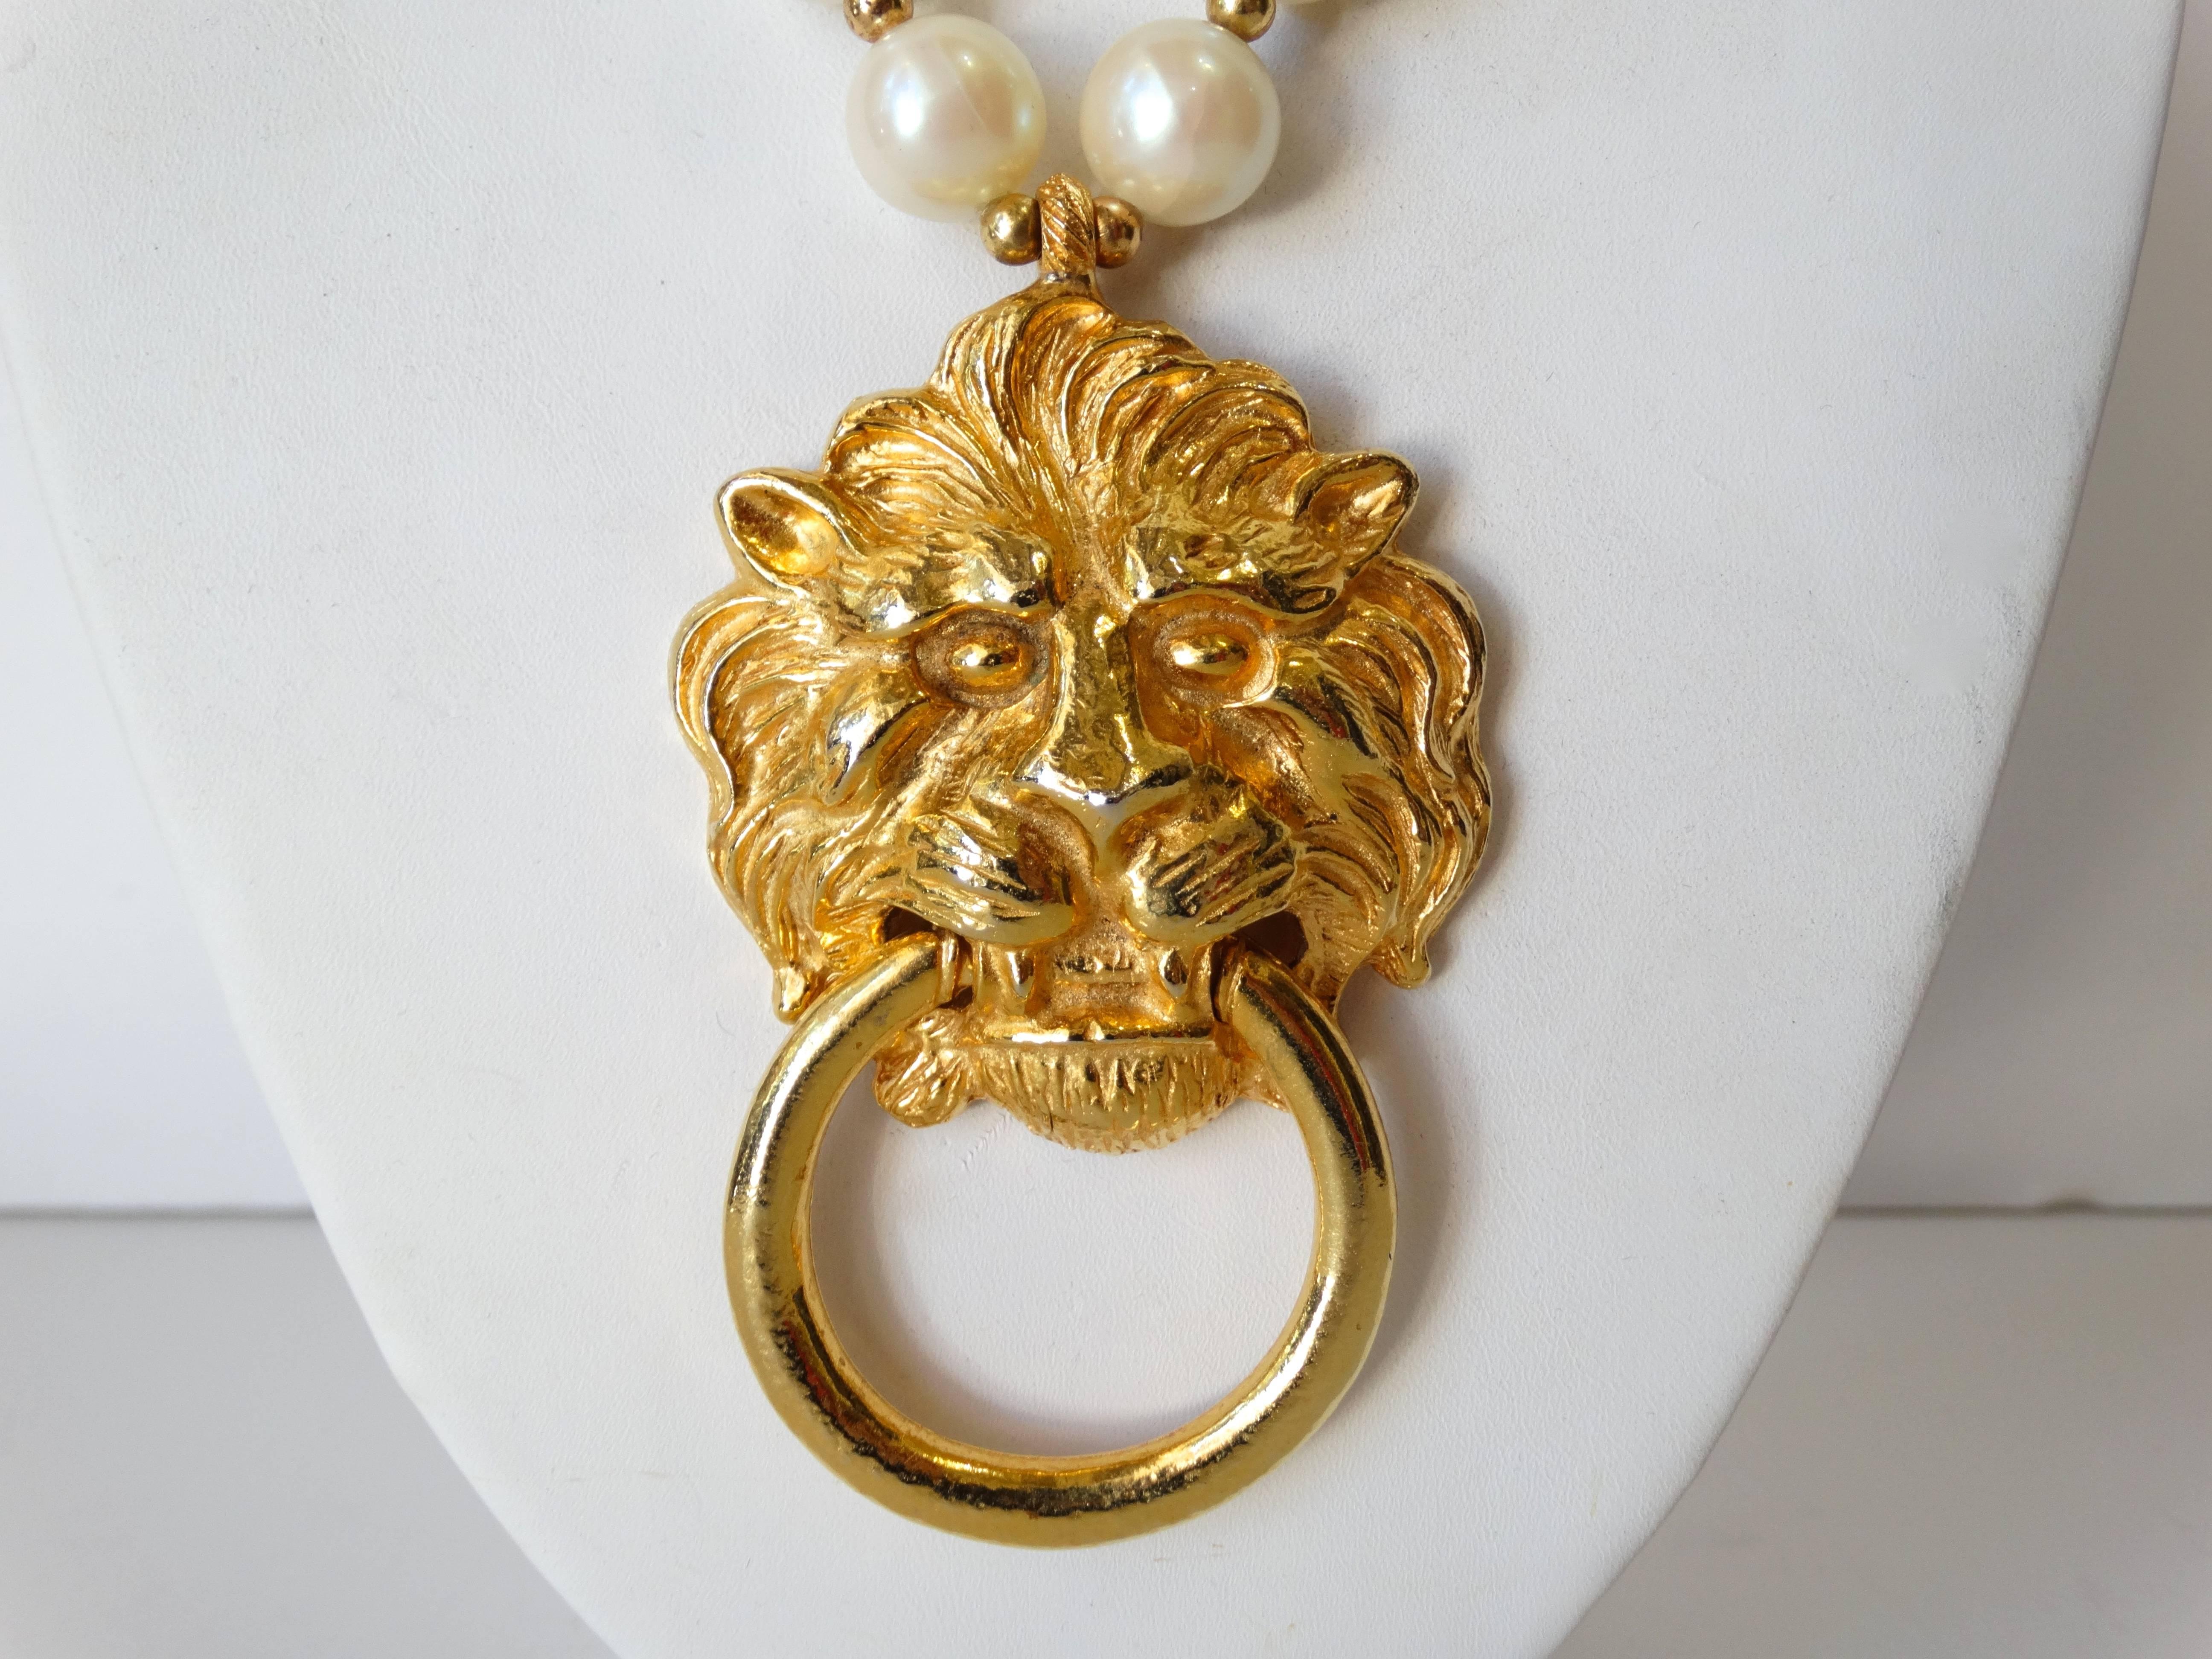 Add some fierceness to your look with our 1980s lion head necklace! Oversized faux pearl beads with large lion's head pendant. Door knocker style pendant made of brilliant gold metal. Face of a lion with hoop suspended from it's teeth. Unsigned,